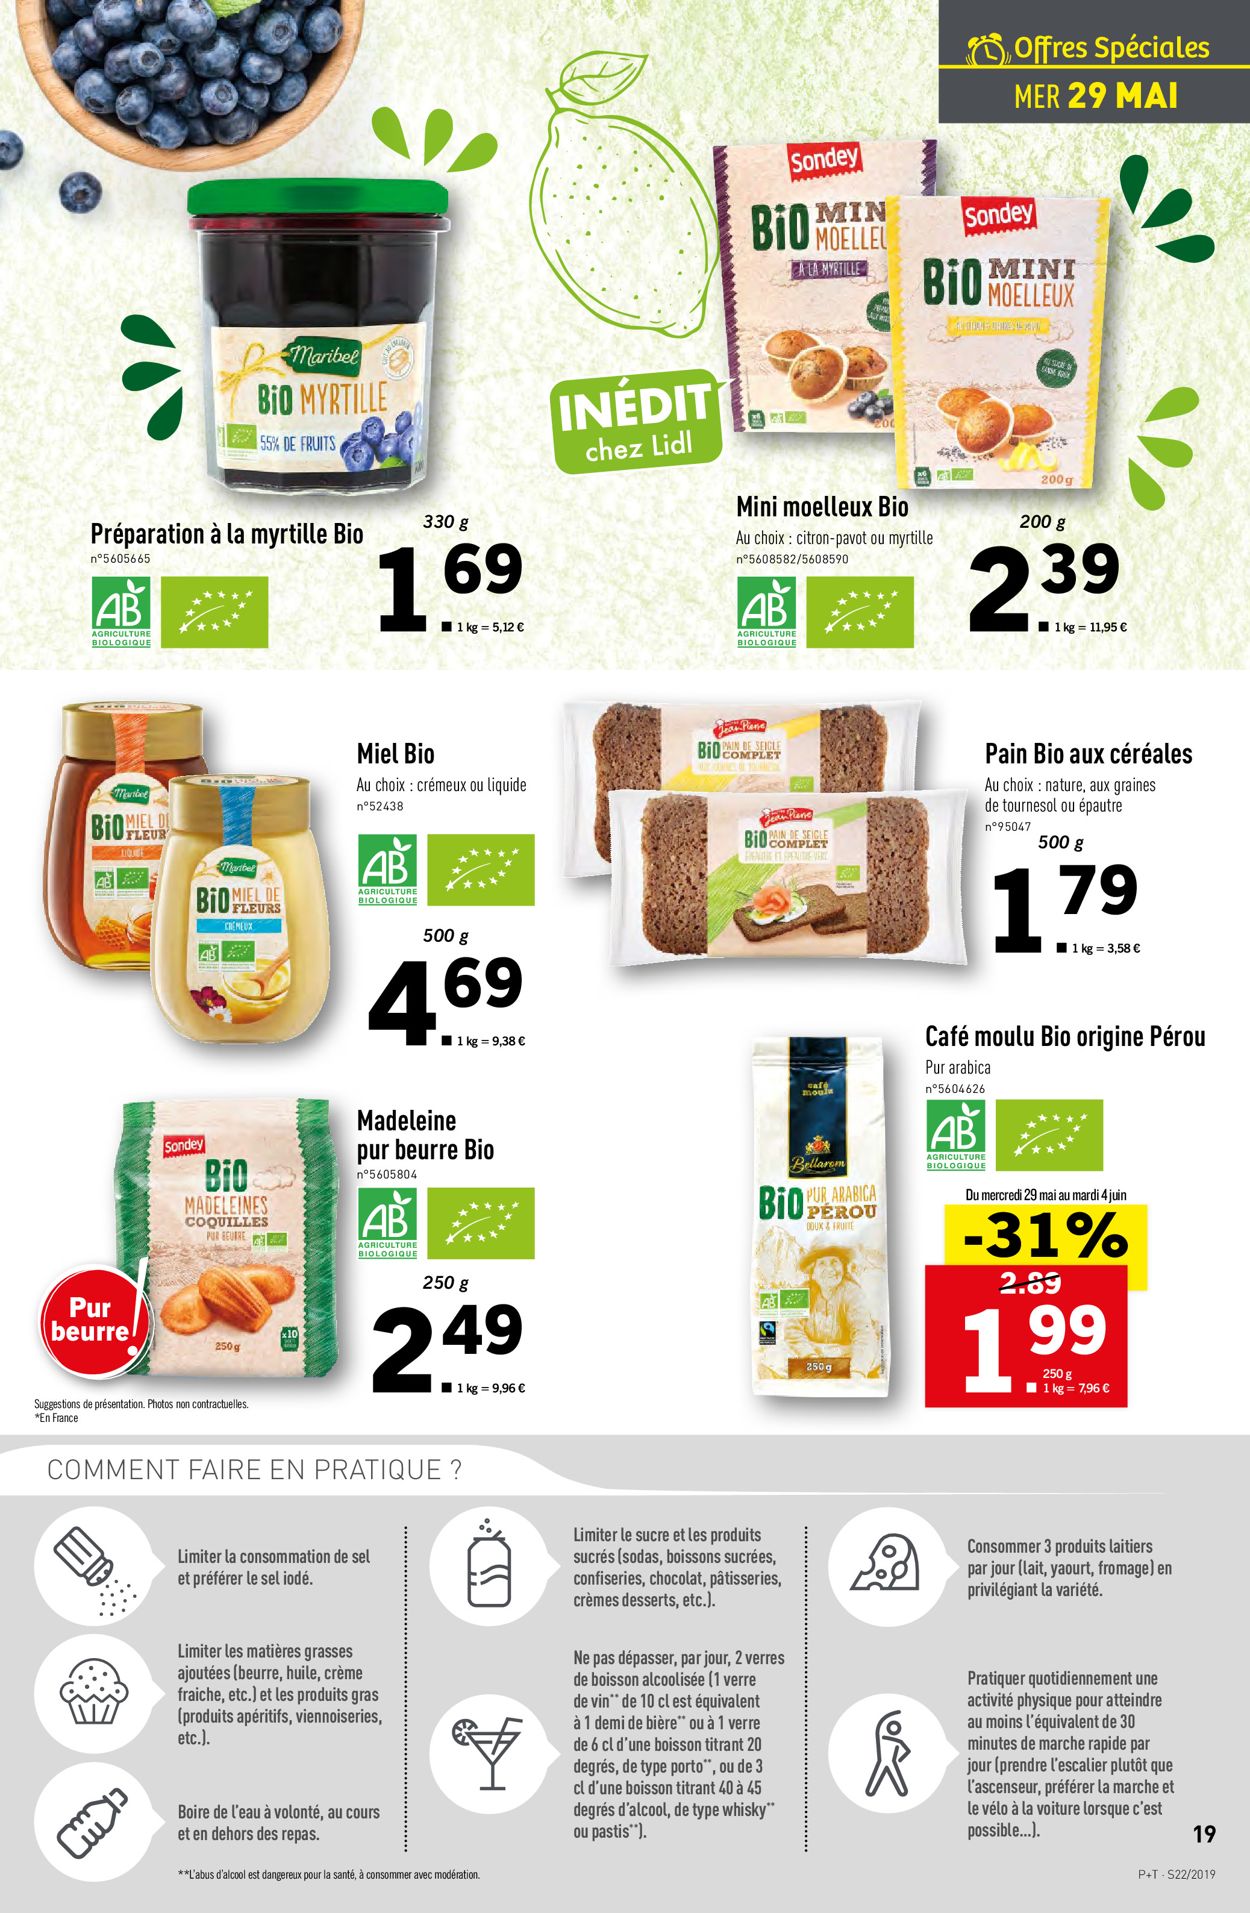 Lidl Catalogue - 29.05-04.06.2019 (Page 19)